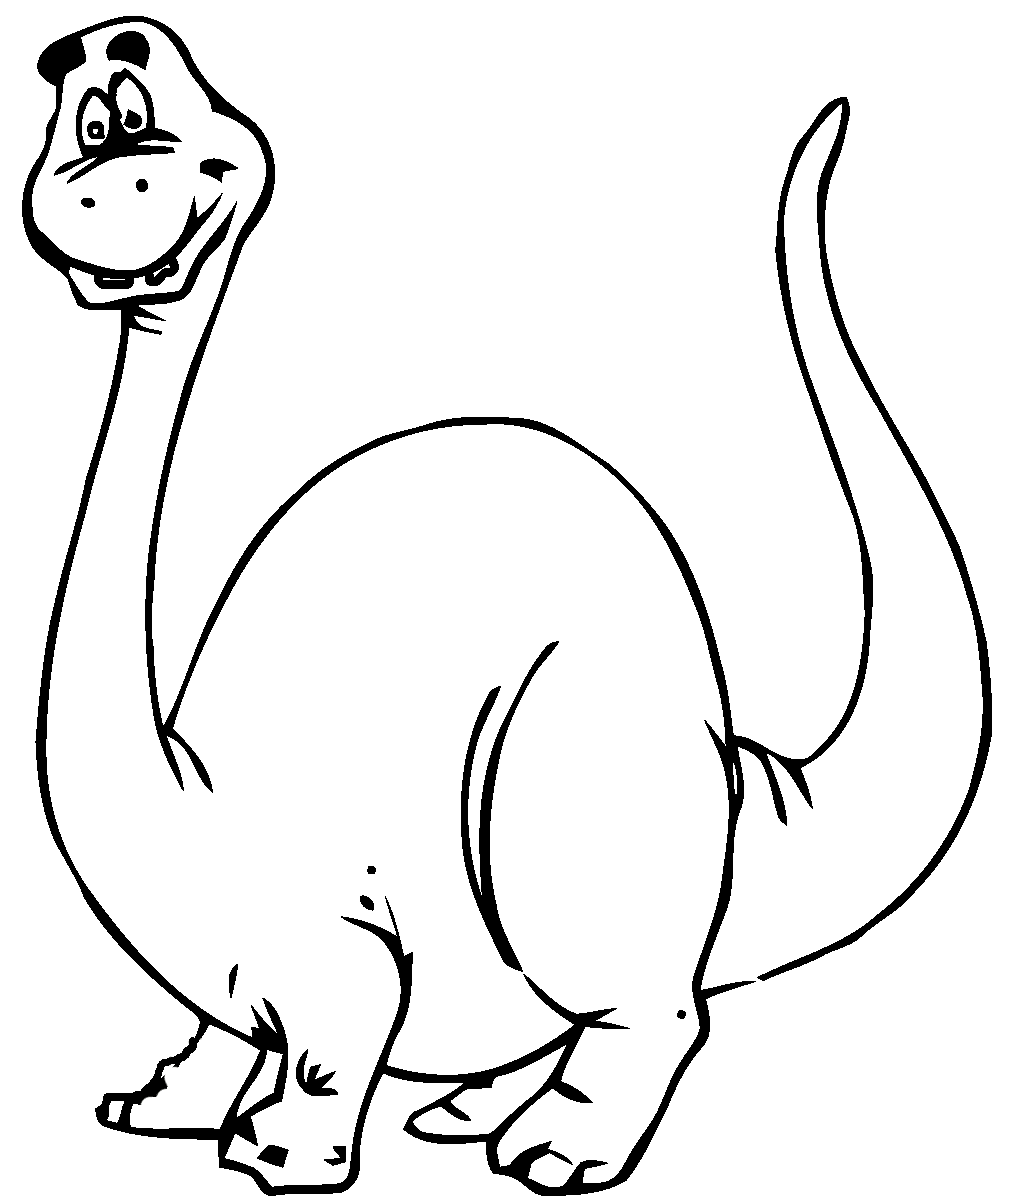 Dinosaur Coloring Pages | Coloring Kids